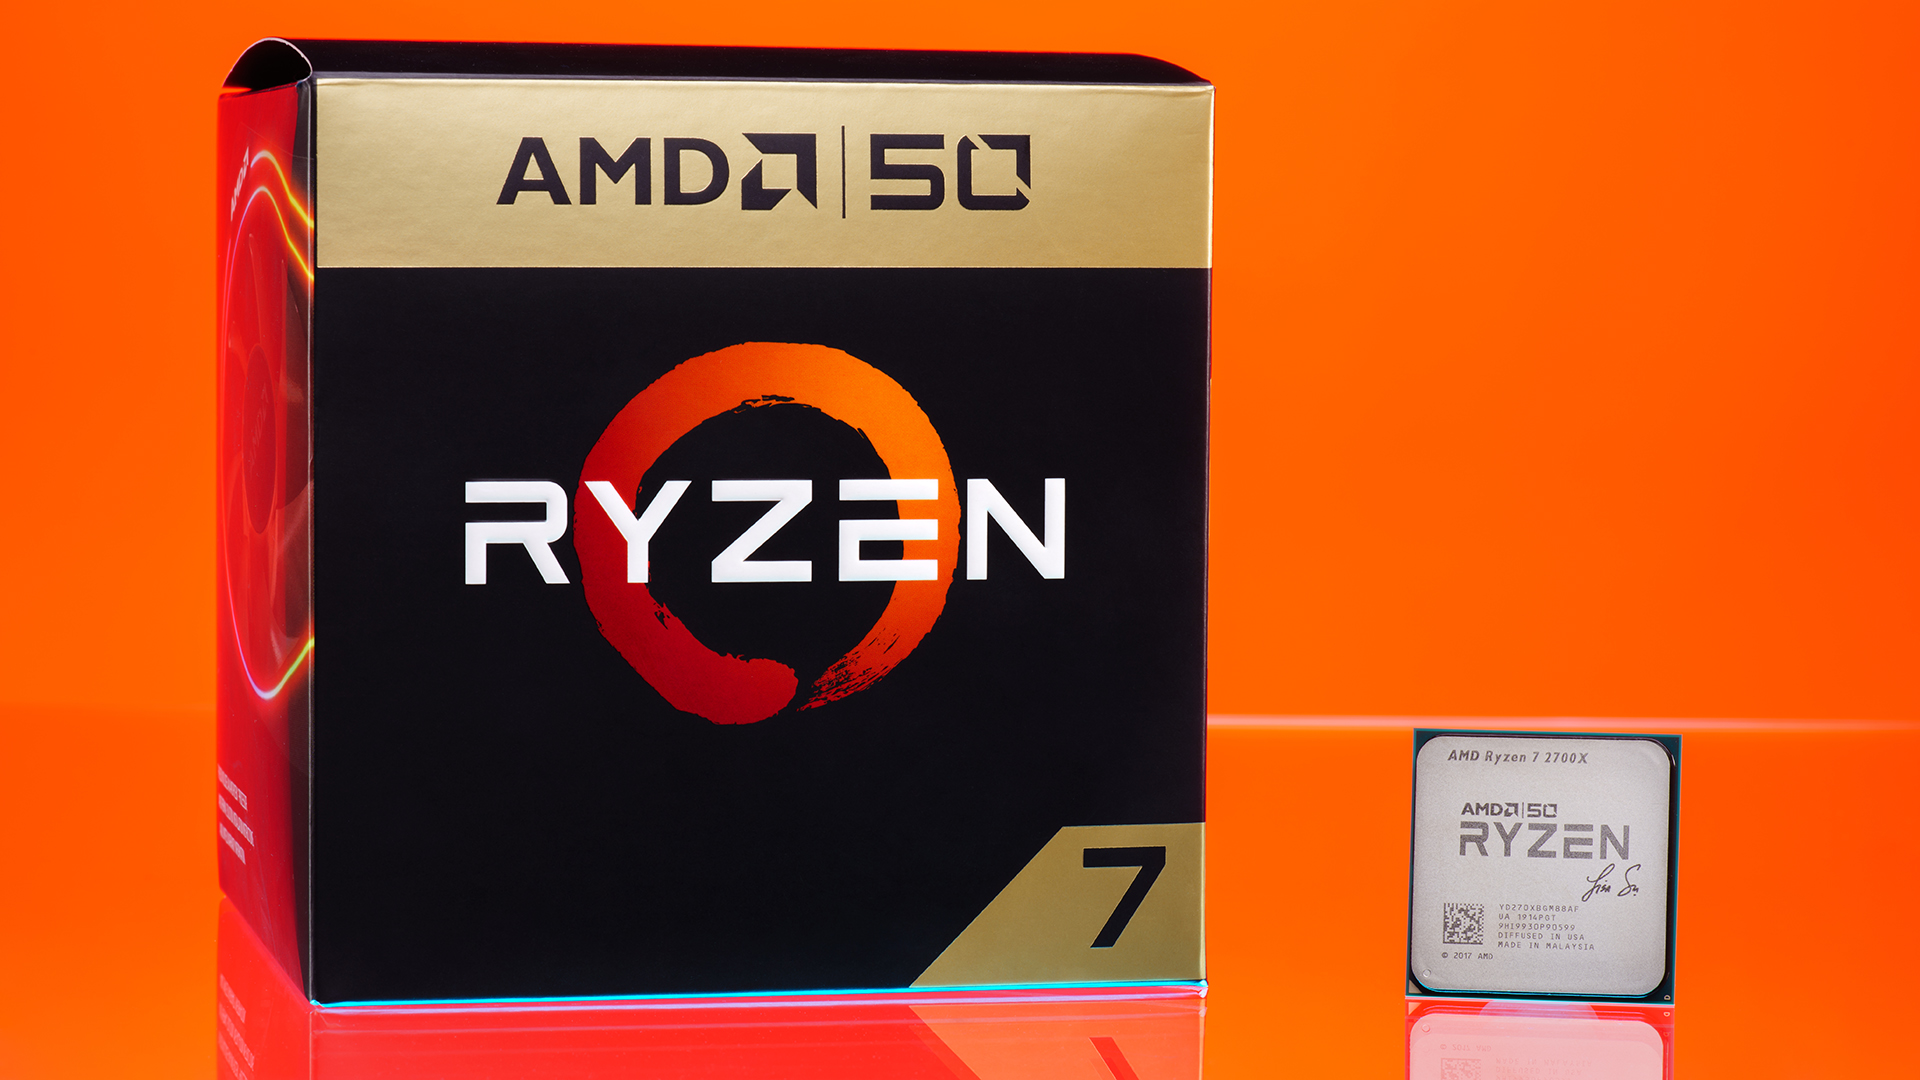 AMD Ryzen 7 2700X 50th Anniversary CPU with laser etched signature of Lisa Su